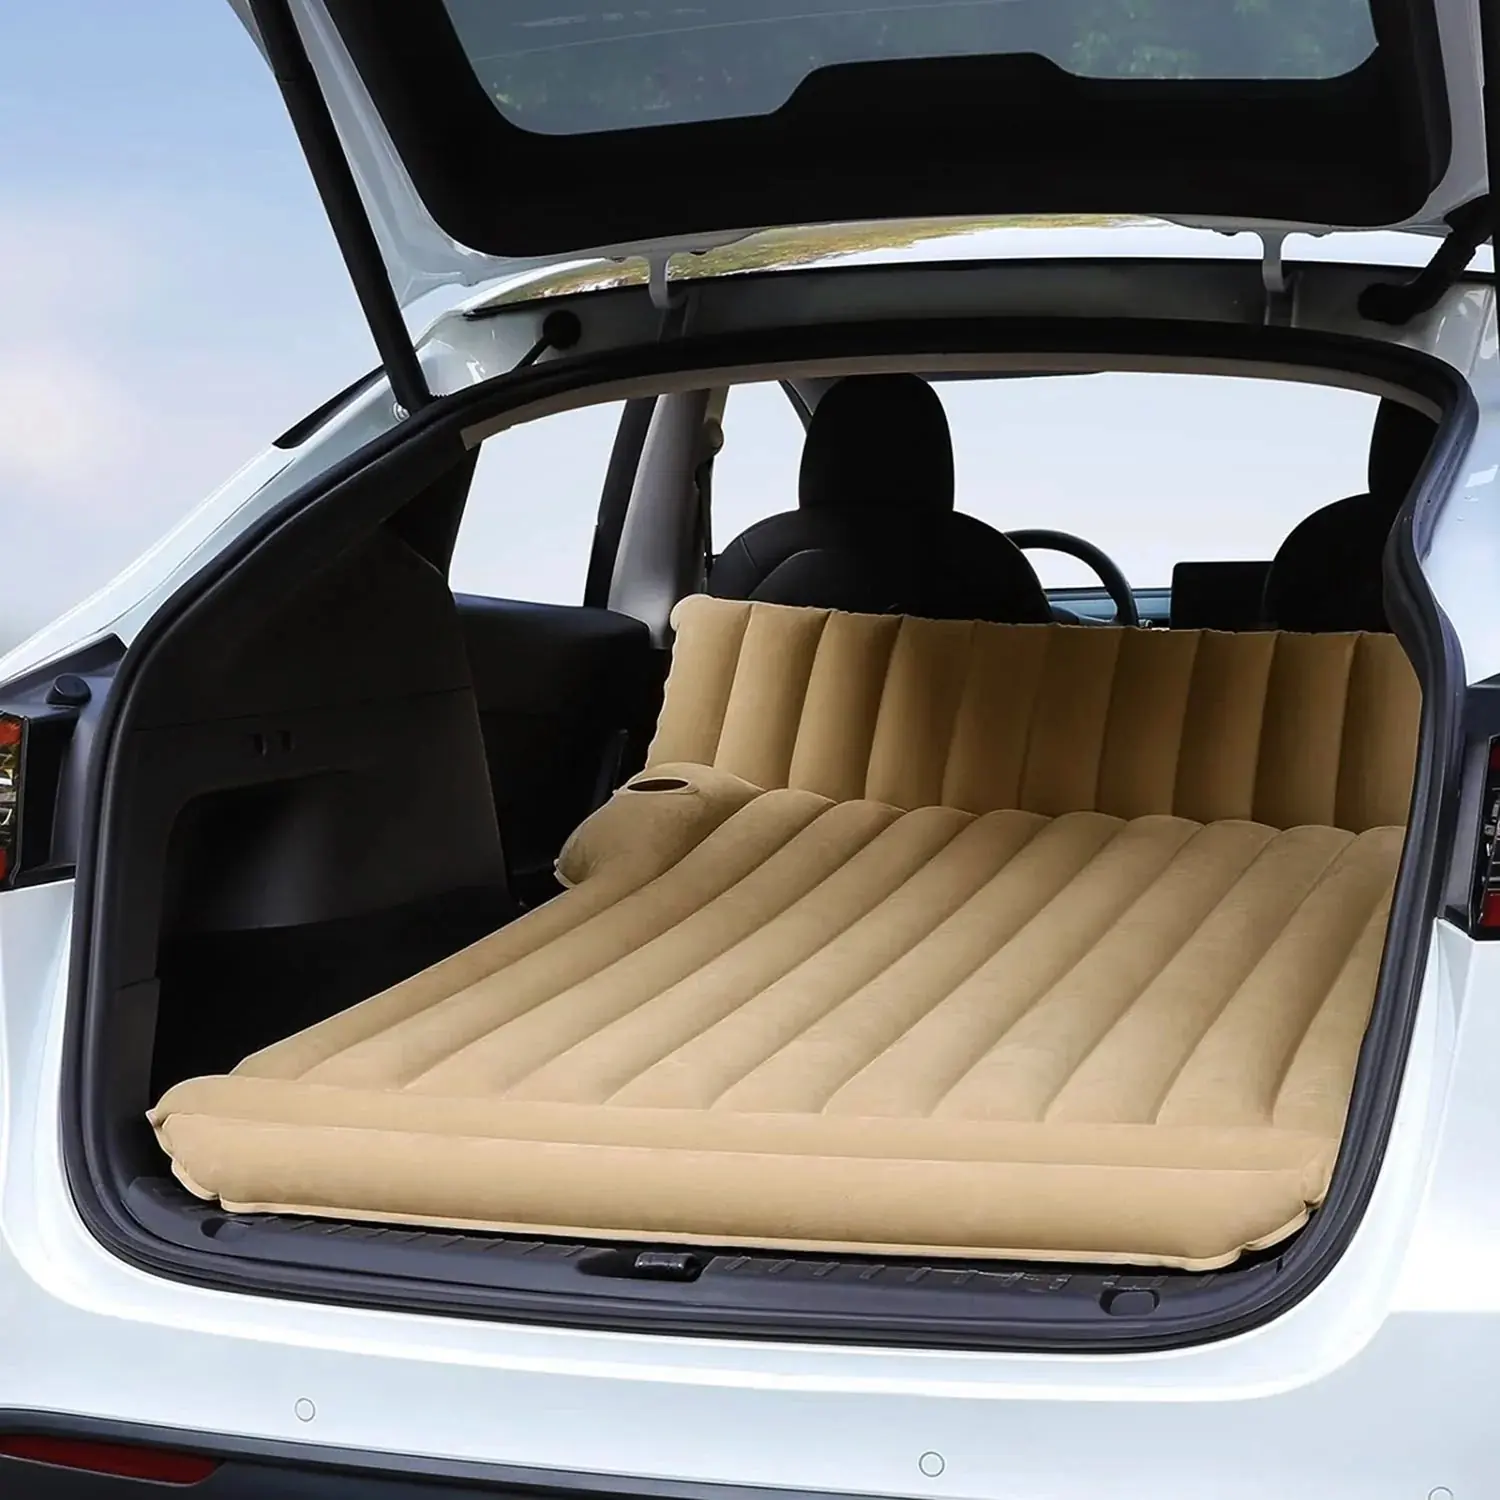 Rest Easy on the Road with the Adreama Tesla Model 3/Y Self-Inflating Air Mattress